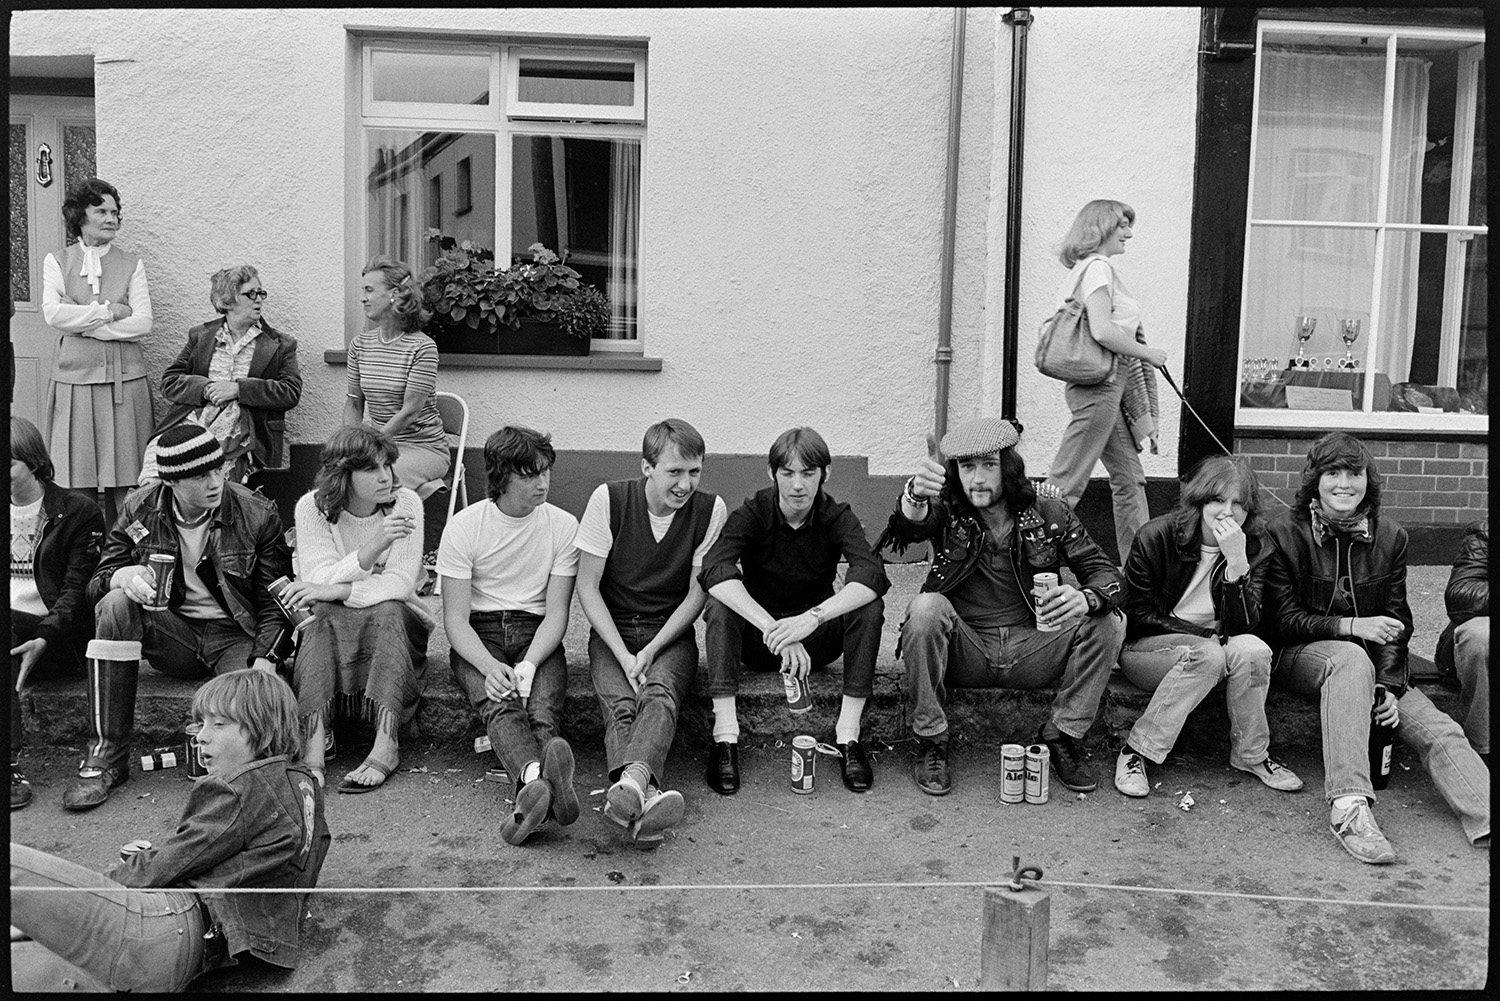 People waiting for fair, cat, pavement artists, Morris Dance.
[Young men and women sitting in a row on a pavement during Winkleigh Fair.  Some are drinking cans of beer and wearing leather jackets. Three ladies are talking behind them, and a woman is walking her dog. A window behind them shows a display of trophies, and another has a window box of plants.]